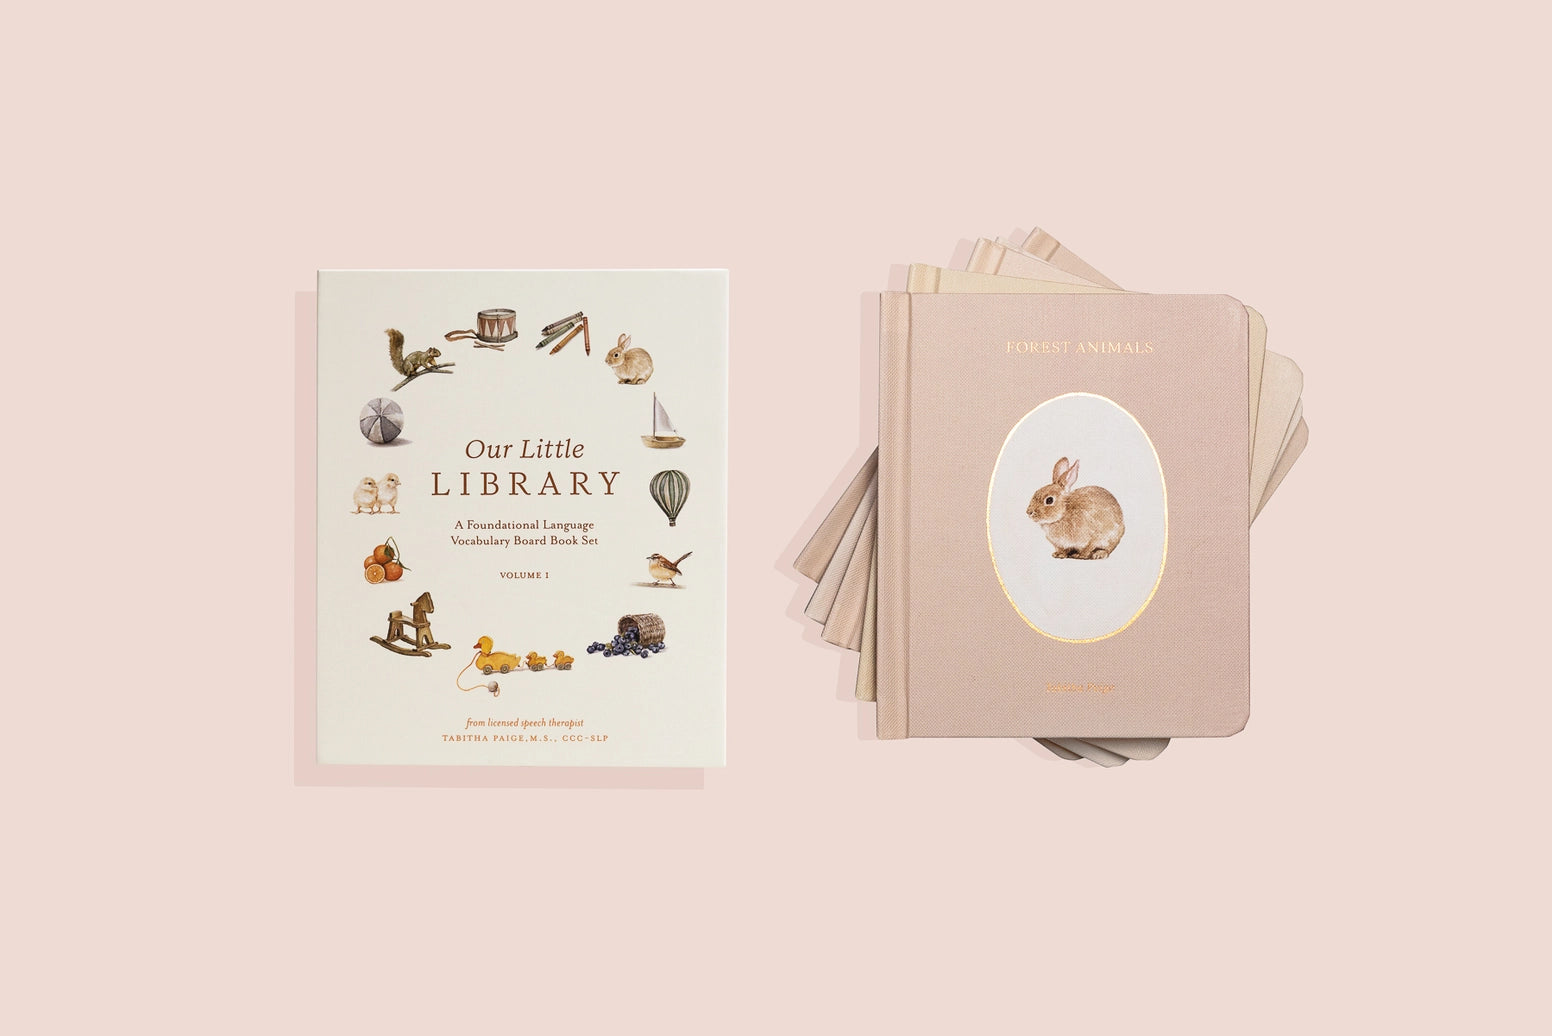 Our Little Library: A Foundational Language Vocabulary Board Book